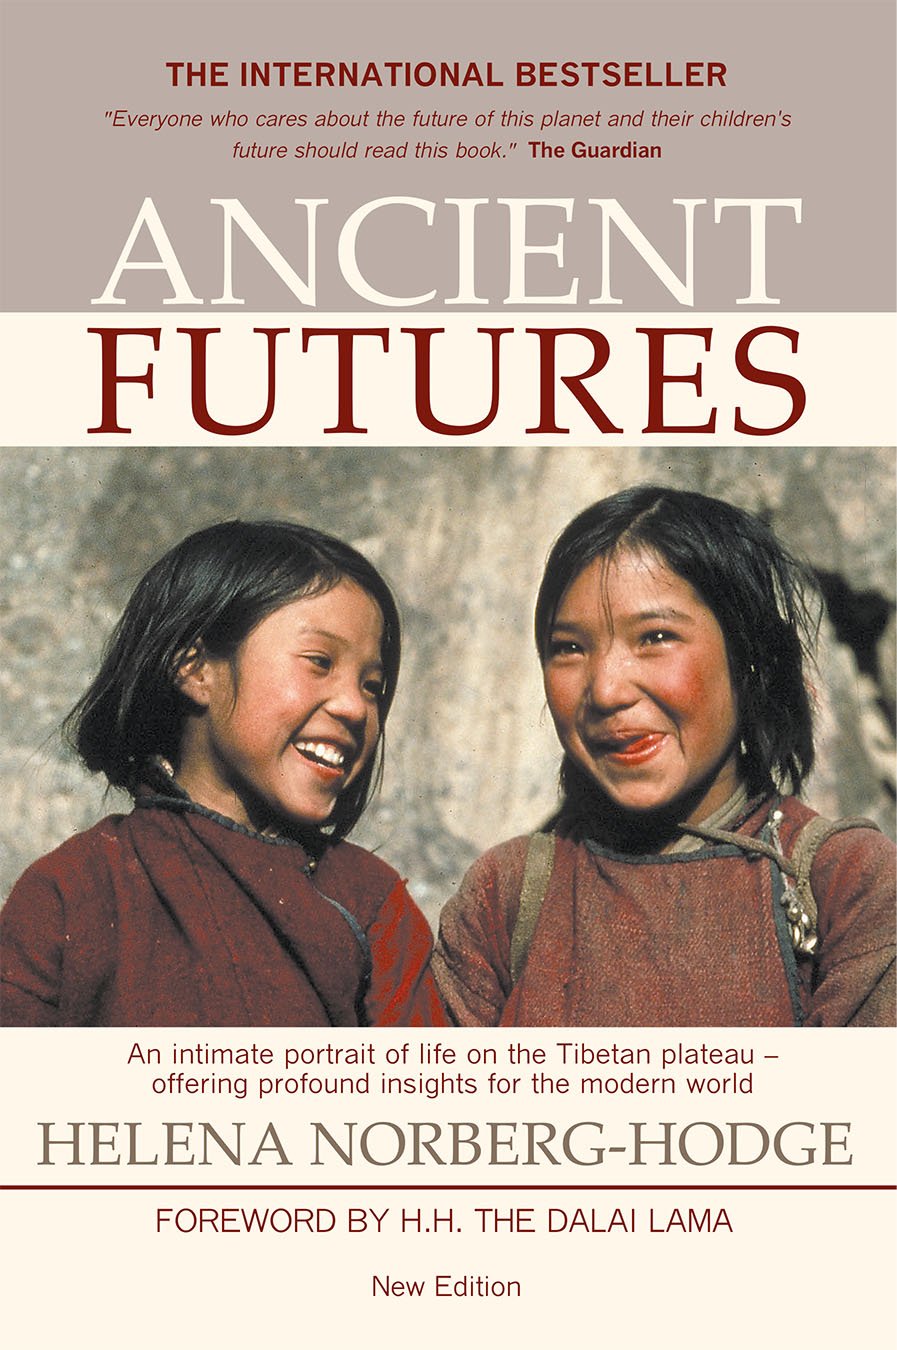 Ancient Futures, 3rd Edition - Chelsea Green Publishing